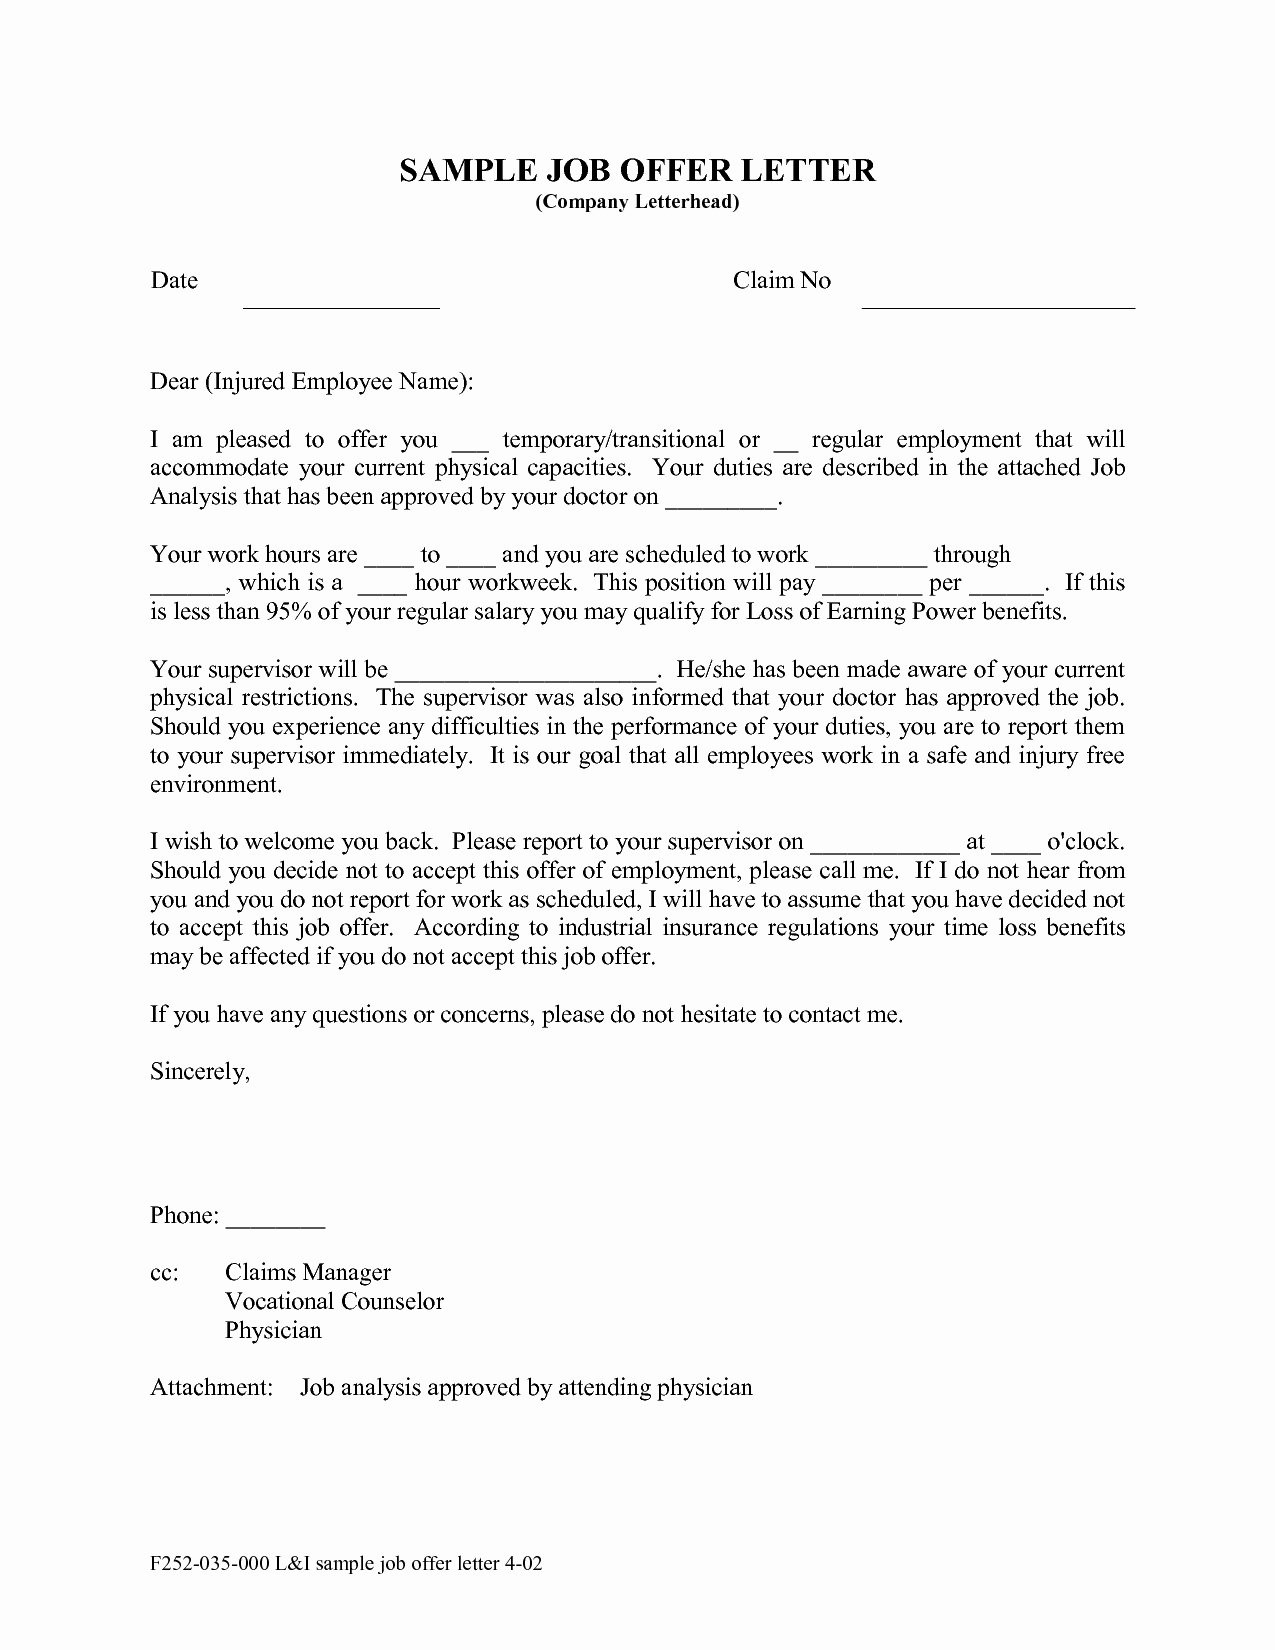 Job Offer Letter Example Elegant I Chose This Image because It is An Example Of A Sample